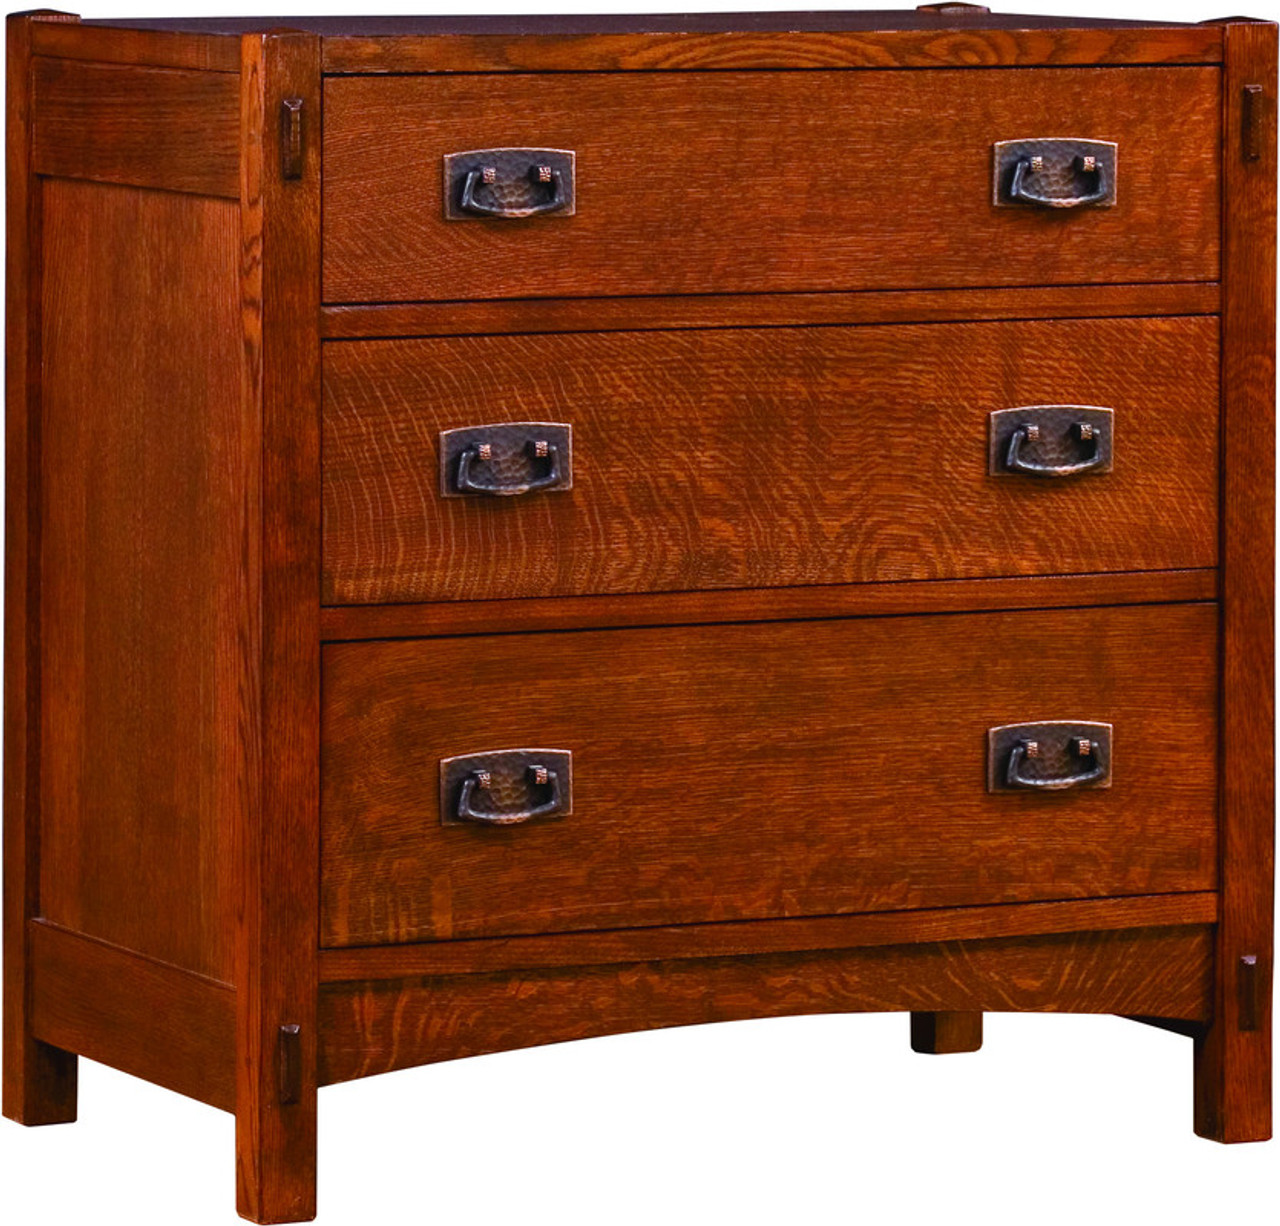 Shop our Three Drawer Chest by Stickley